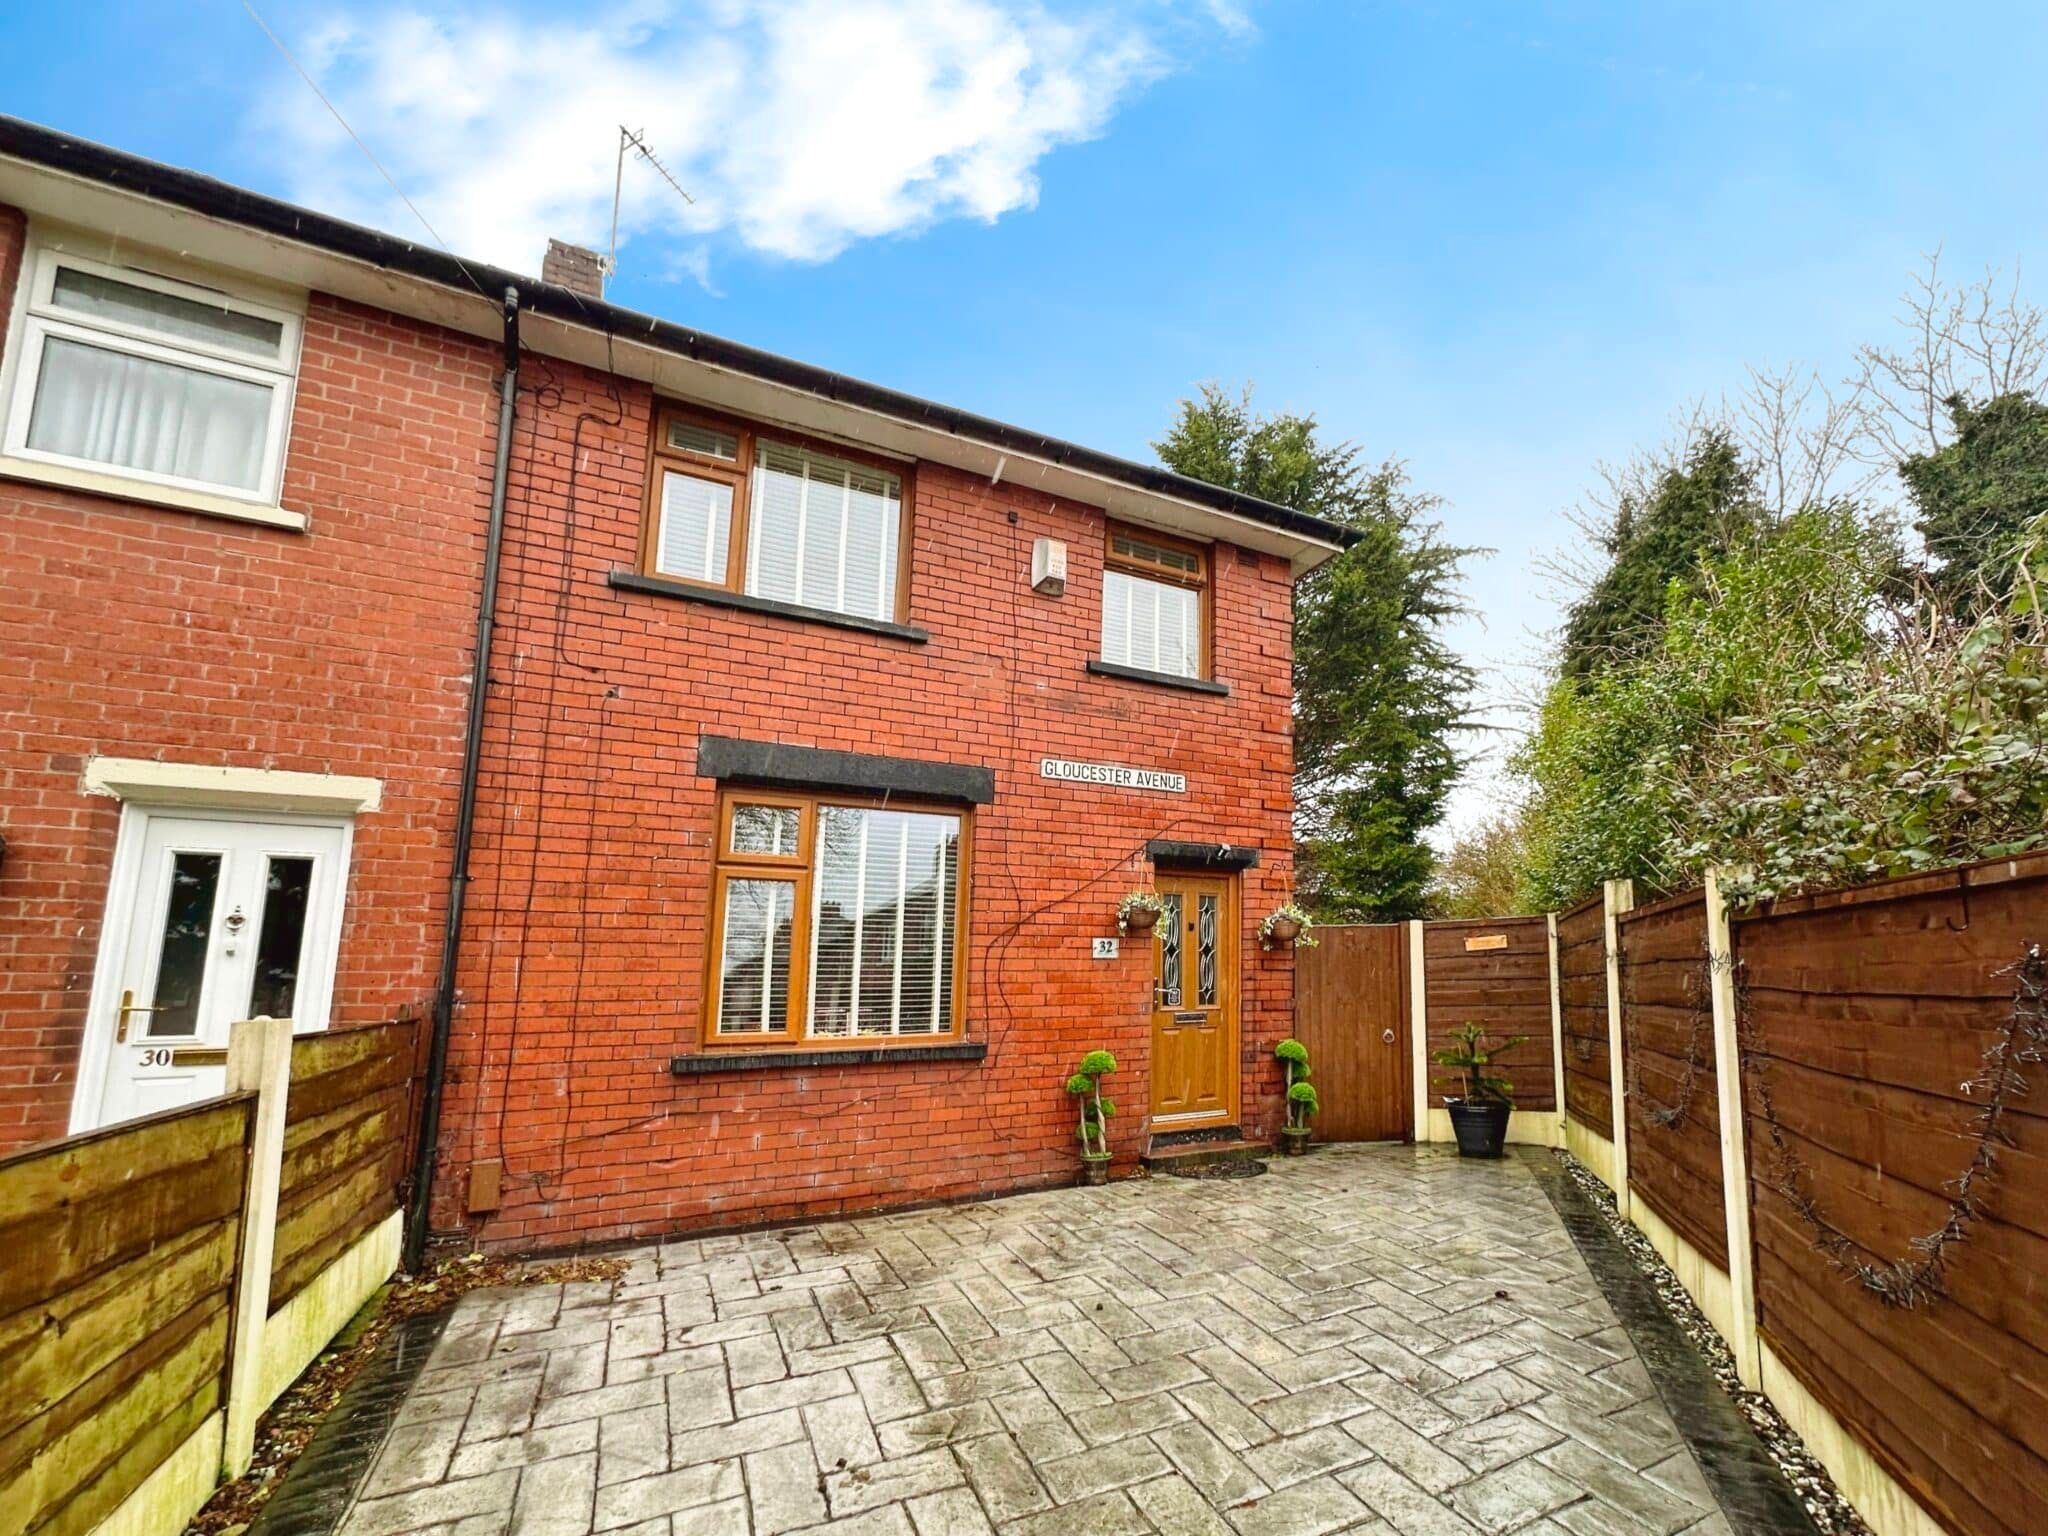 Gloucester Avenue, Whitefield, Manchester, Manchester, M45 6BX